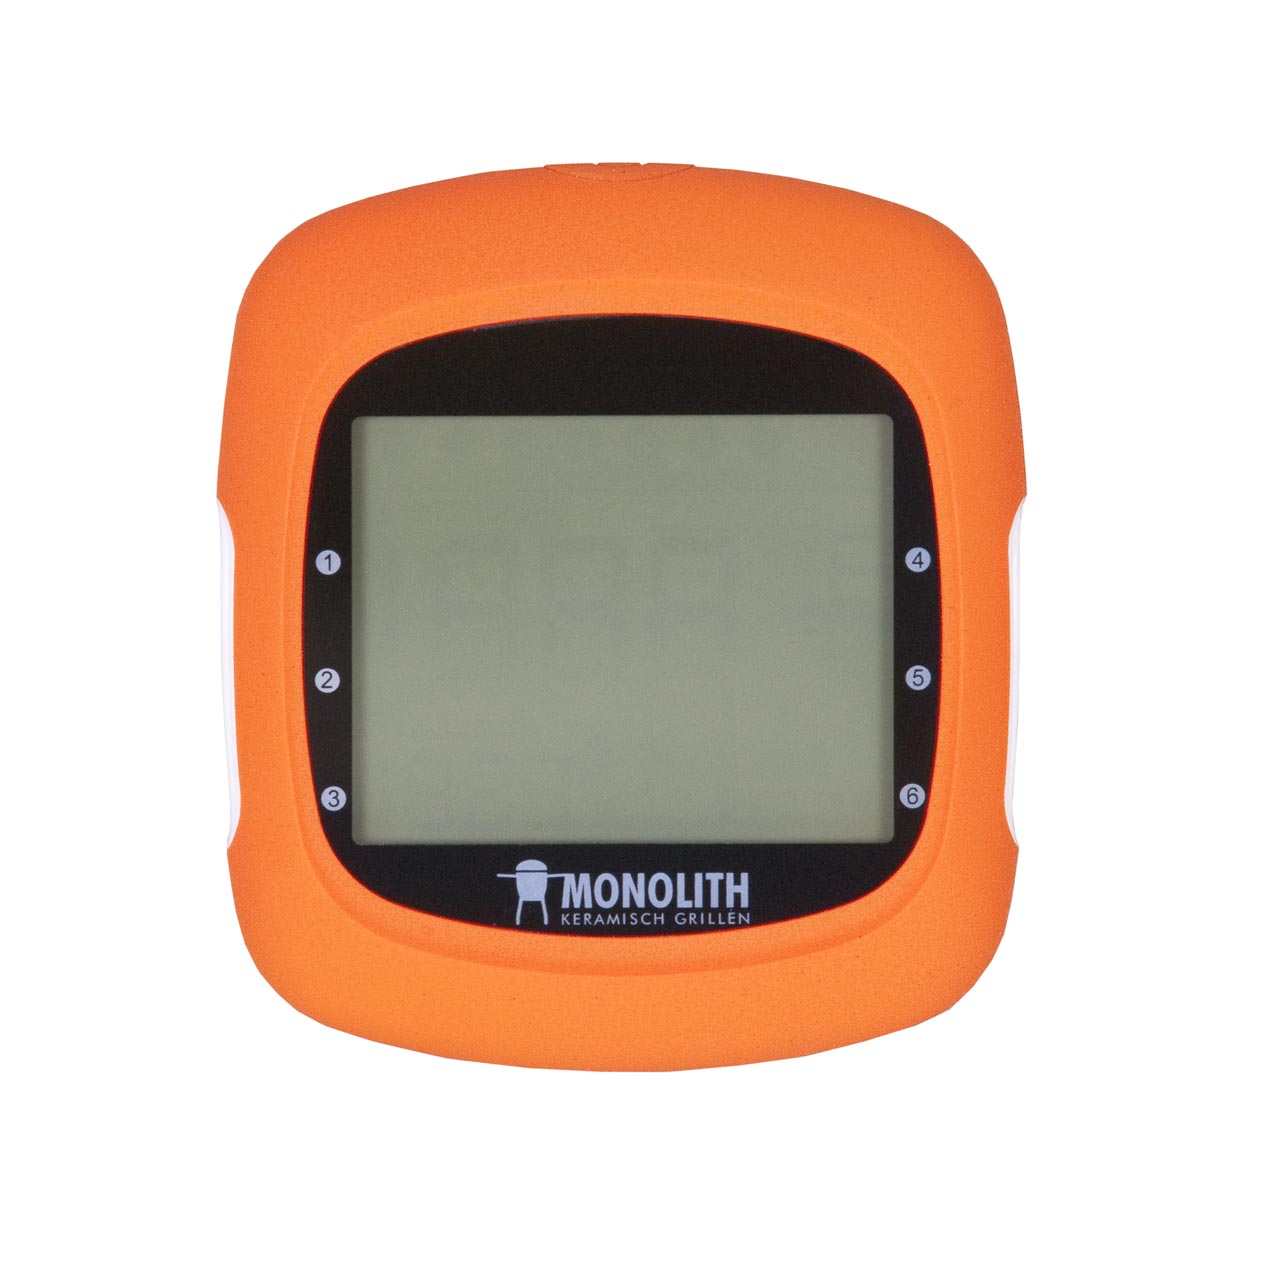 Monolith - Thermo-Lith Bluetooth Thermometer